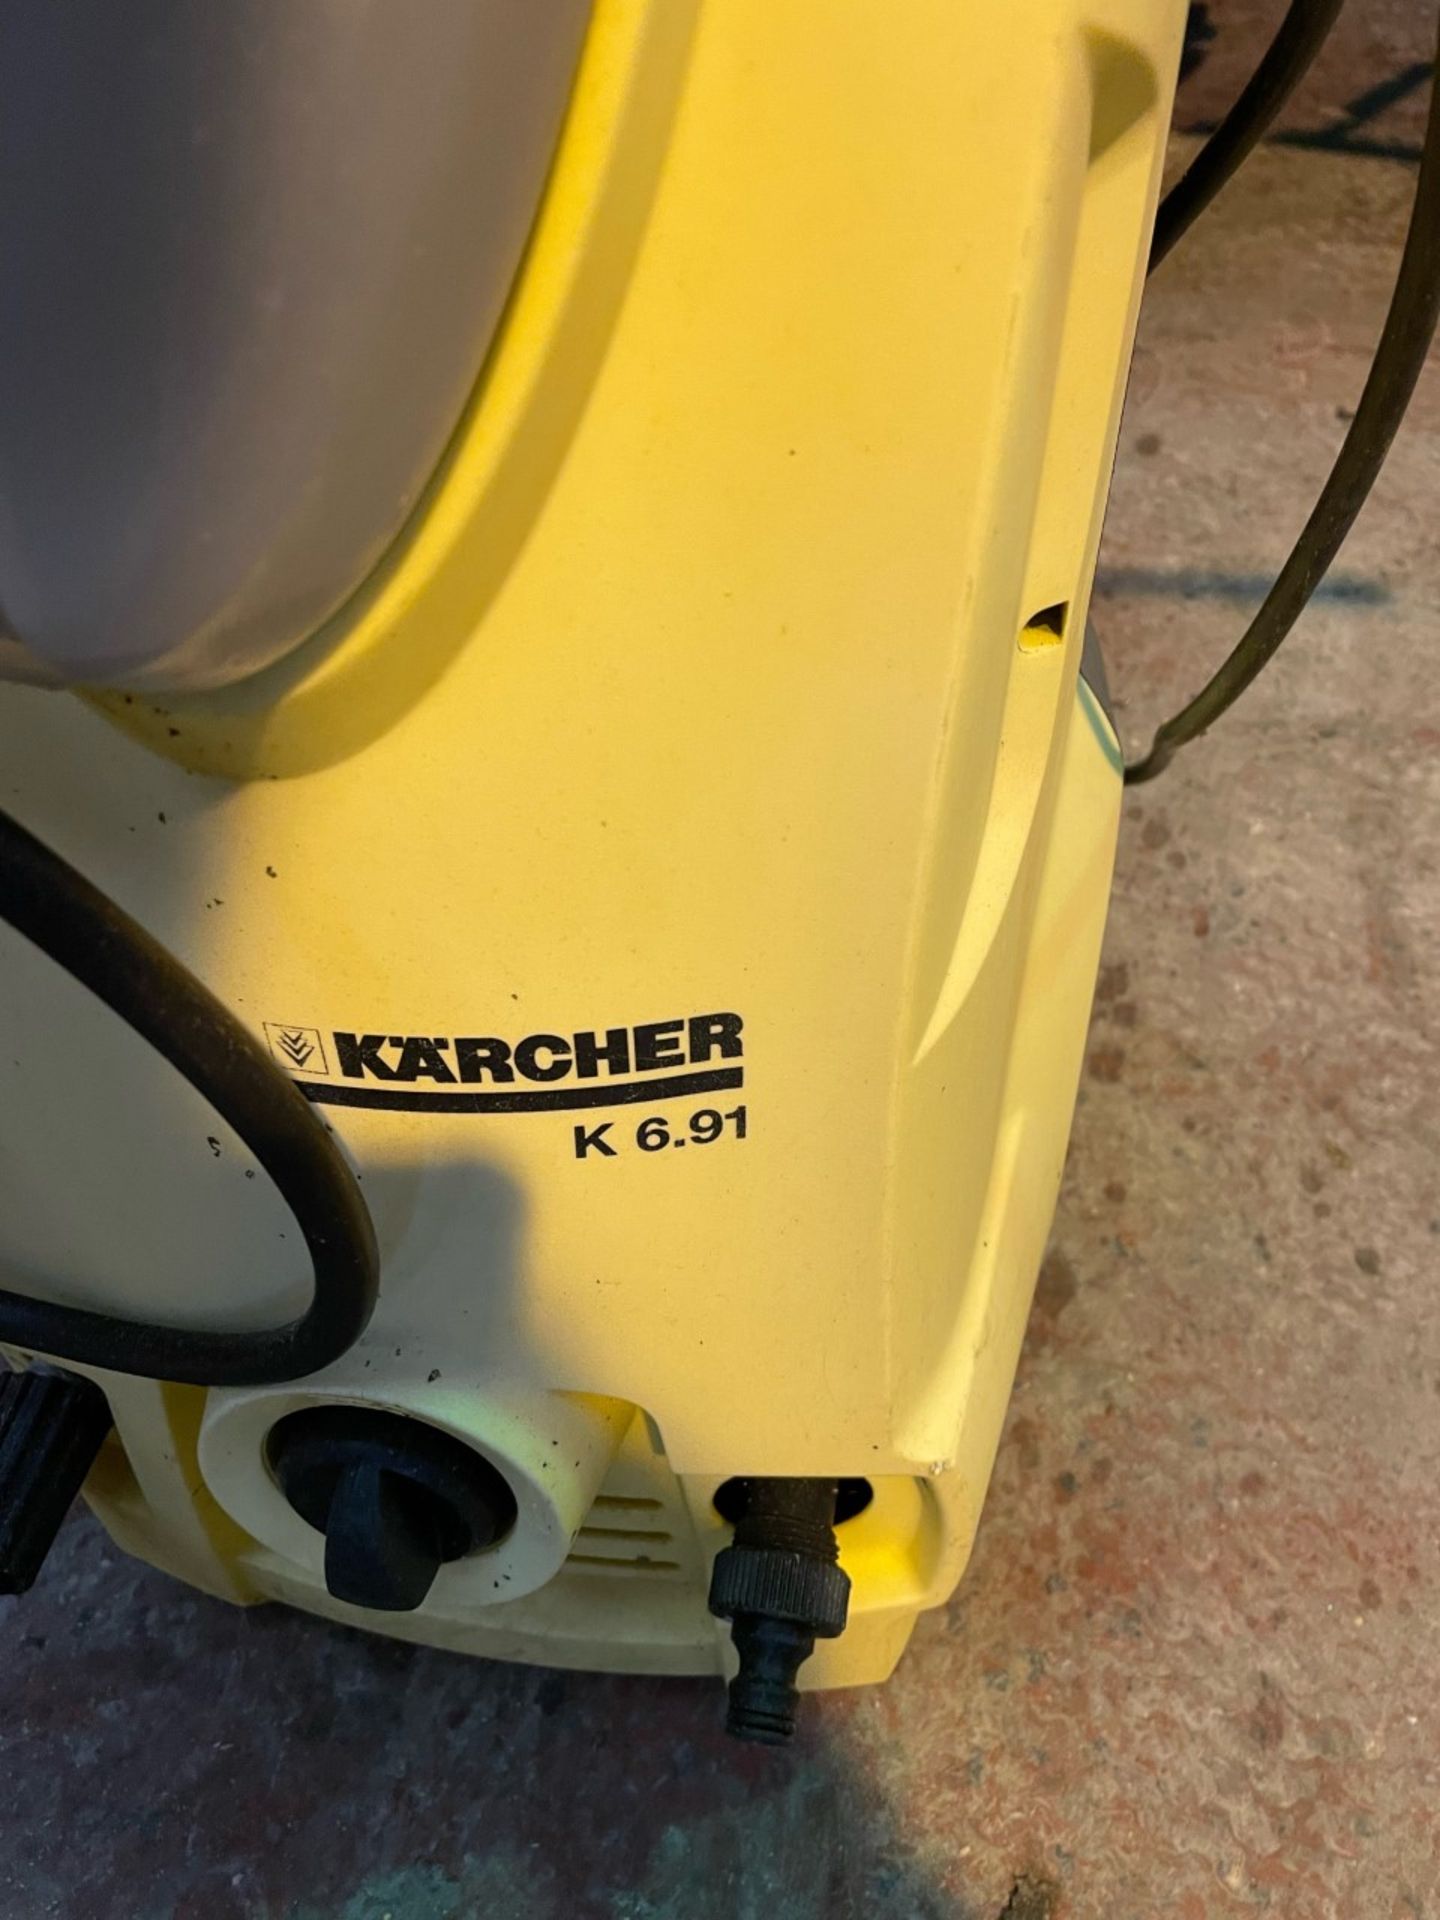 Karcher k6 pressure washer with lance and patio cleaner head. - Image 5 of 6